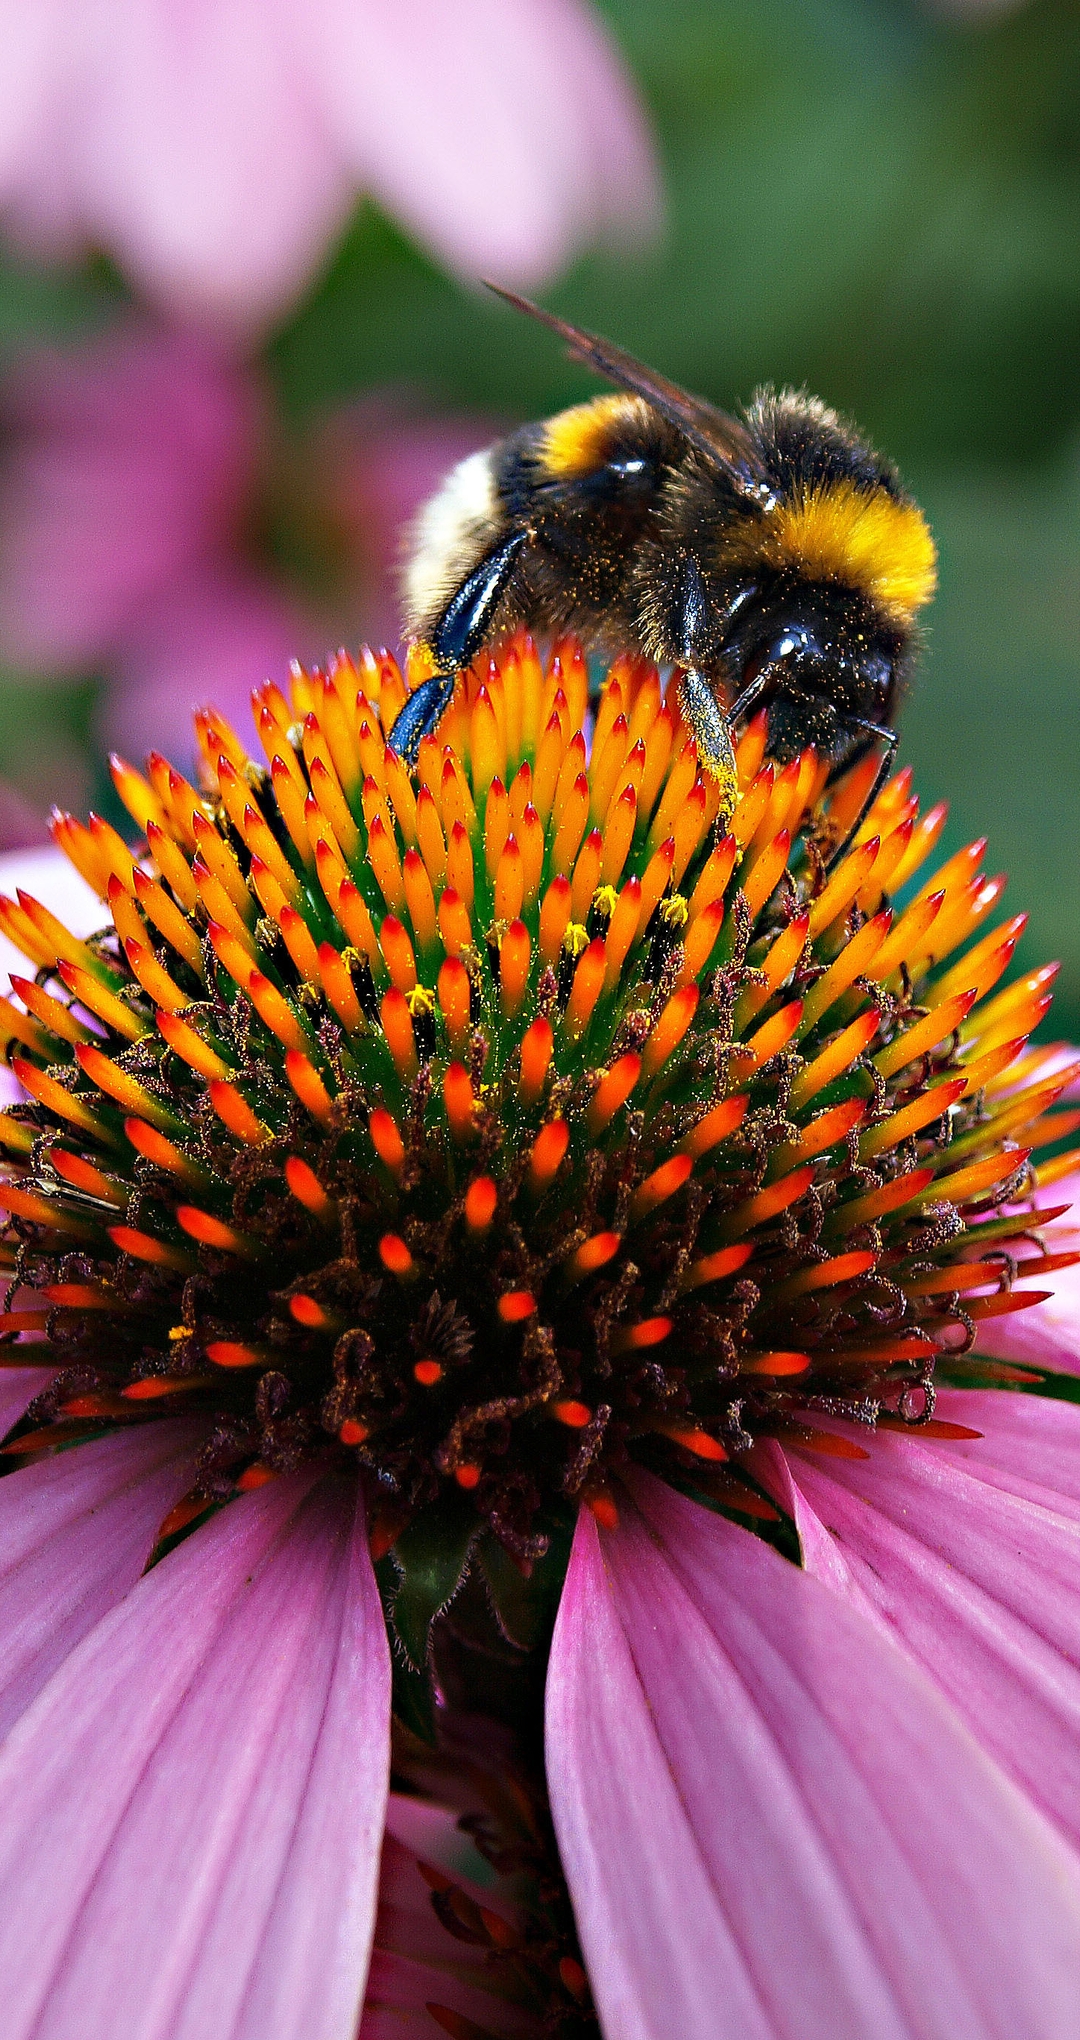 Image: Flower, Coneflower, bumblebee, sits, collects, pollen